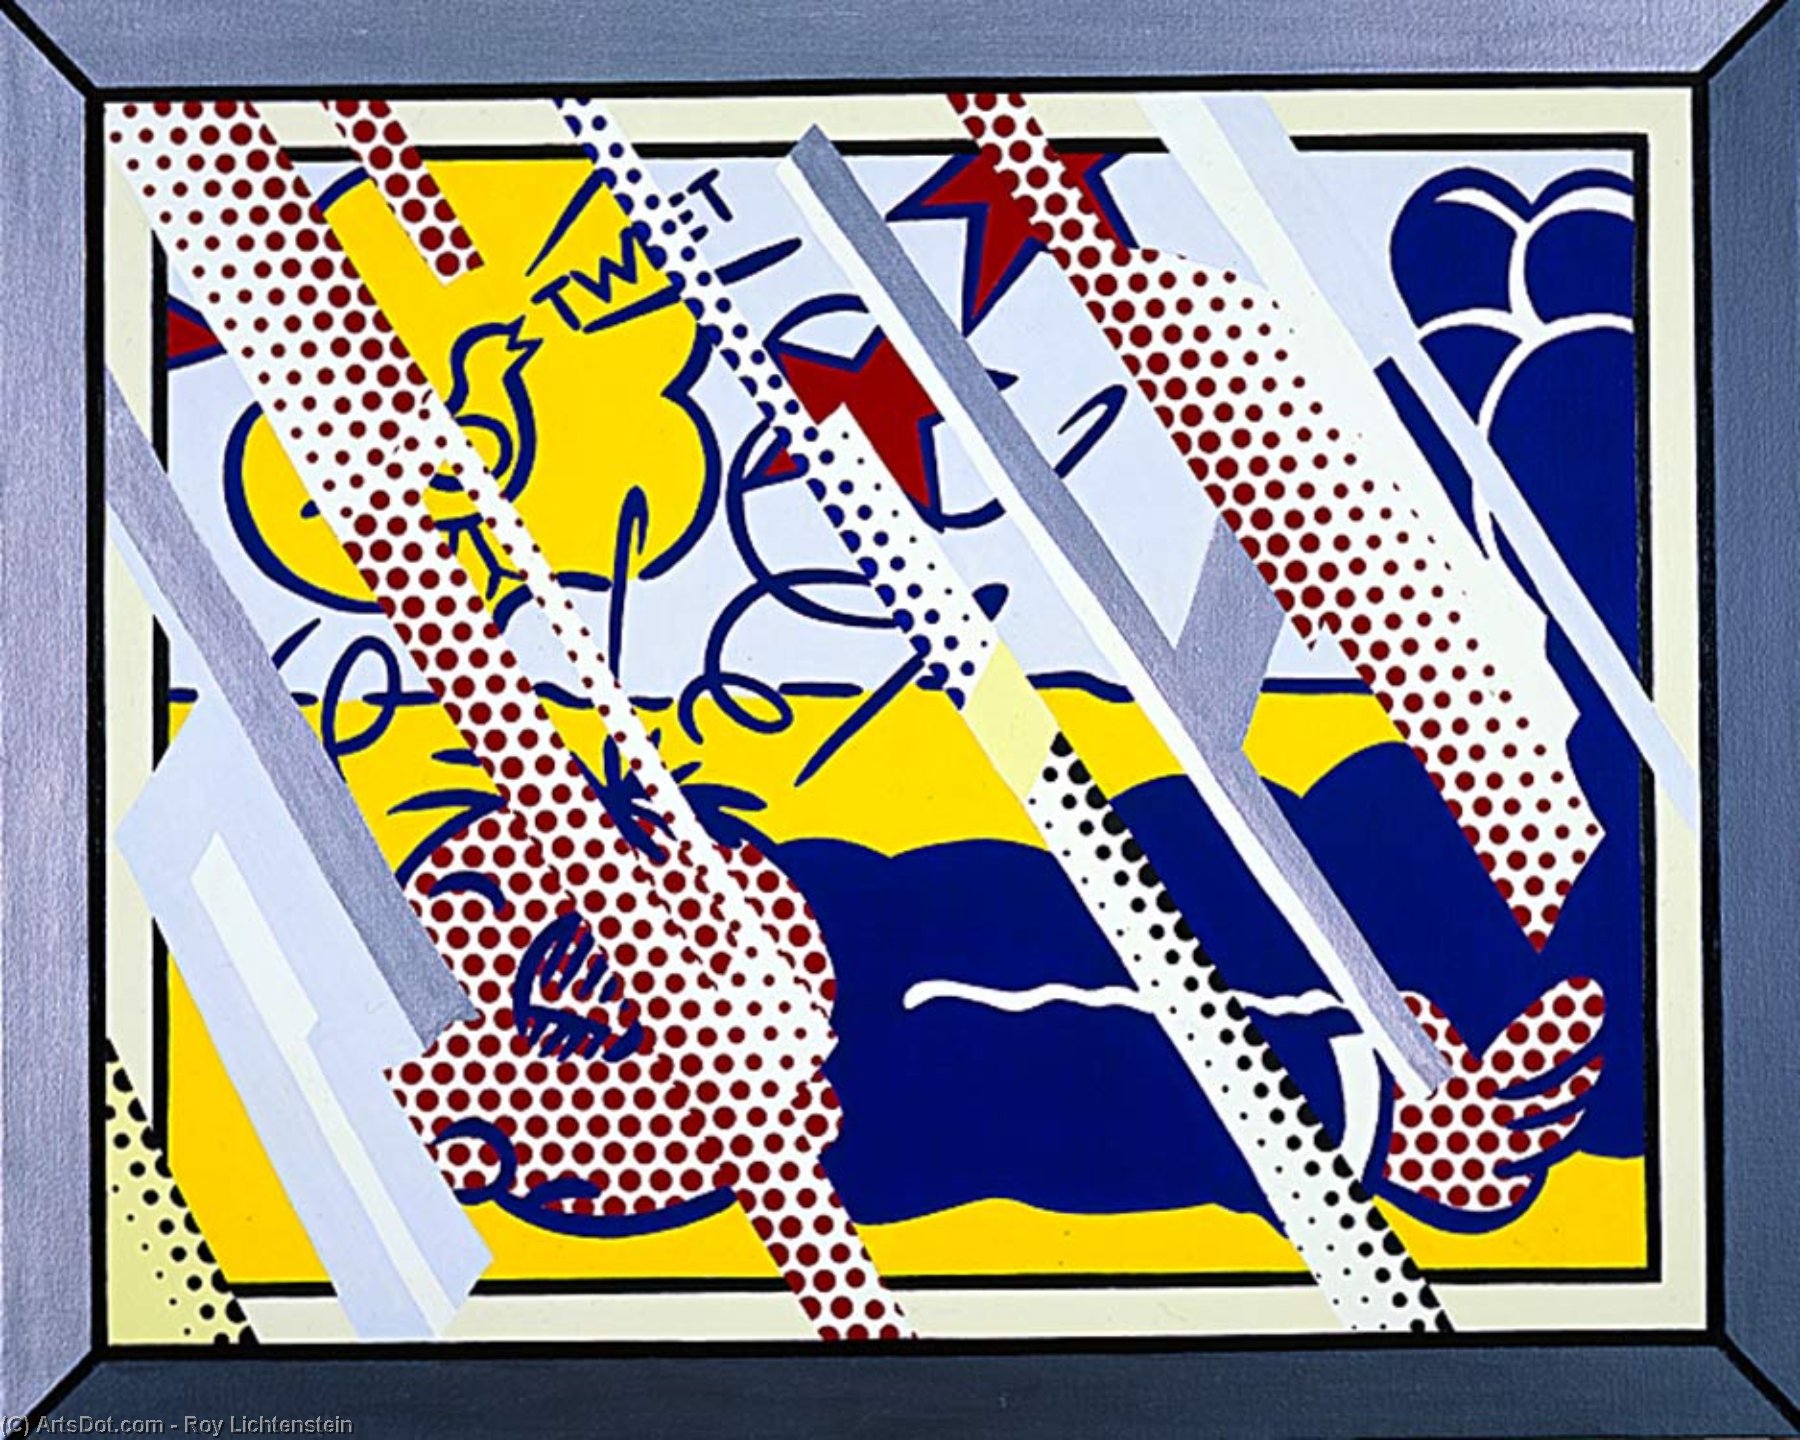 Order Oil Painting Replica Reflections Wimpy II, 1988 by Roy Lichtenstein (Inspired By) (1923-1997, United States) | ArtsDot.com